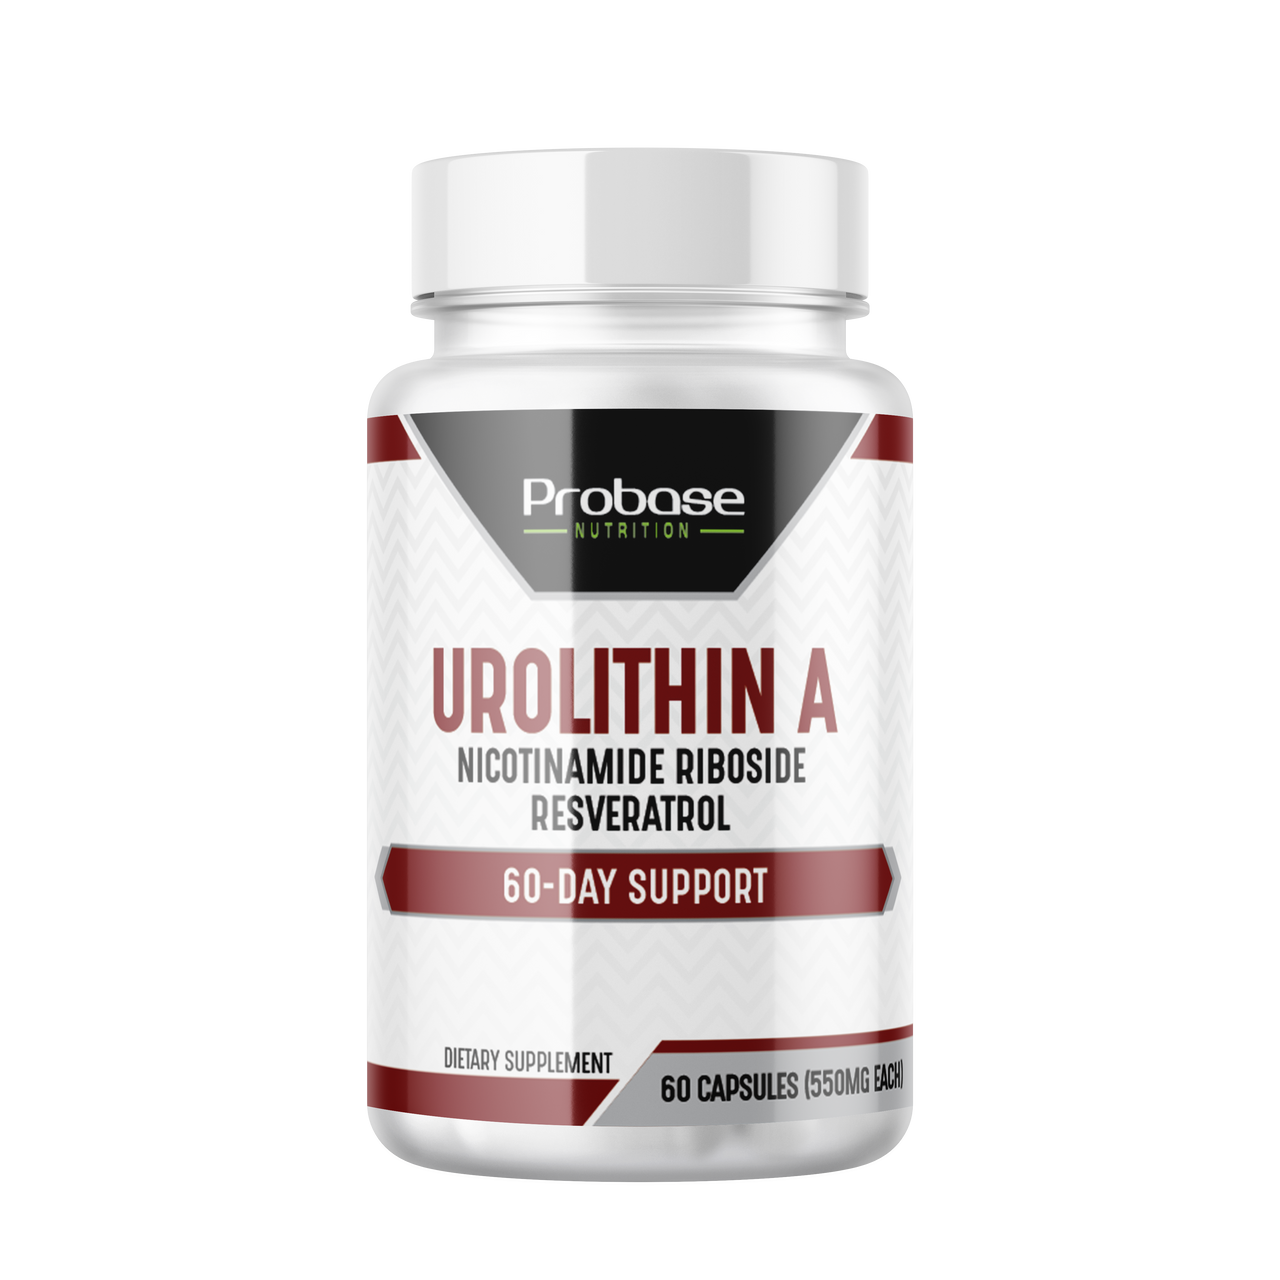 Probase Urolithin A - [60-Day Supply] - with Added NR and Resveratrol, Premium Quality Cellular Health Support - Alternative to NMN, NAD, CoQ10, PQQ for Healthy Aging